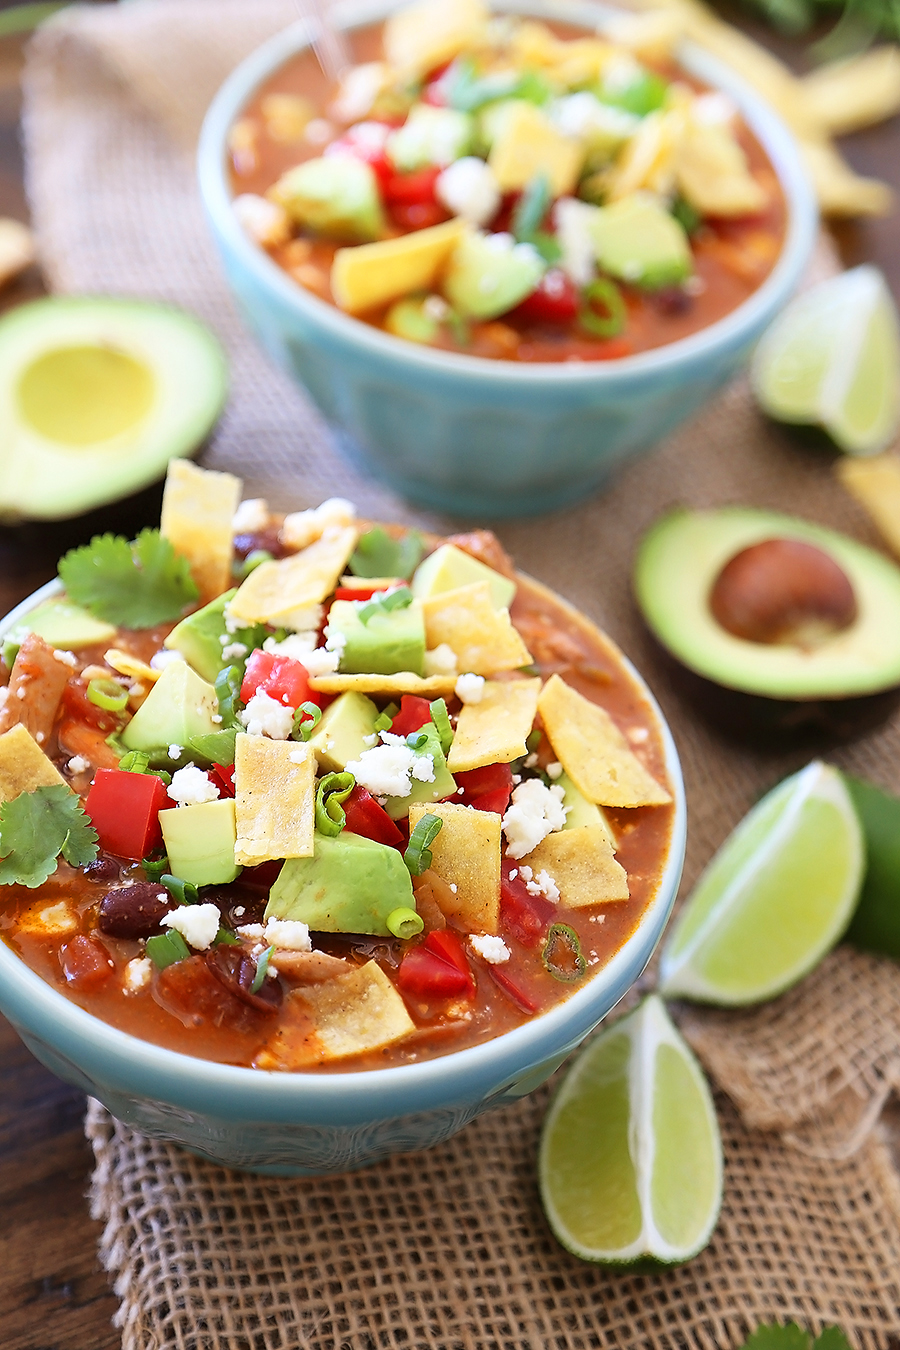 Easy Chicken Tortilla Soup - Serve this spicy, citrusy chicken tortilla soup for a fun twist on your weeknight meals! Add crunchy baked or fried tortilla strips (recipe included), cilantro, avocado and crumbled queso for a truly amazing soup! Thecomfortofcooking.com